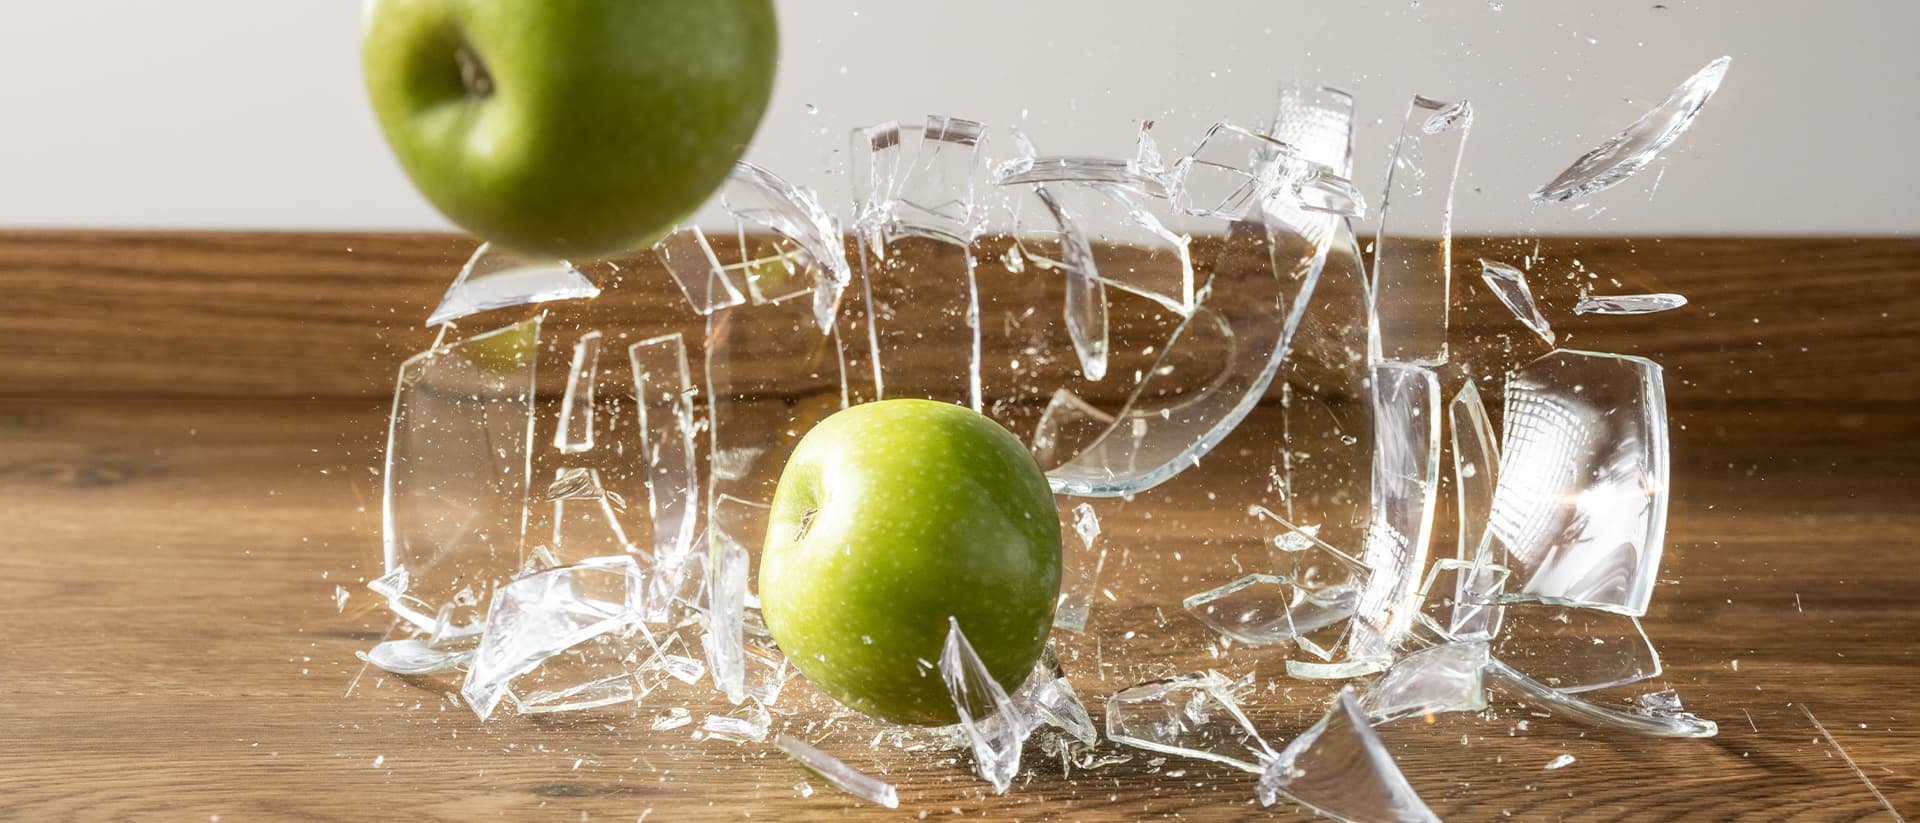 glass vase with apples falls to a brown vinyl floor and breaks